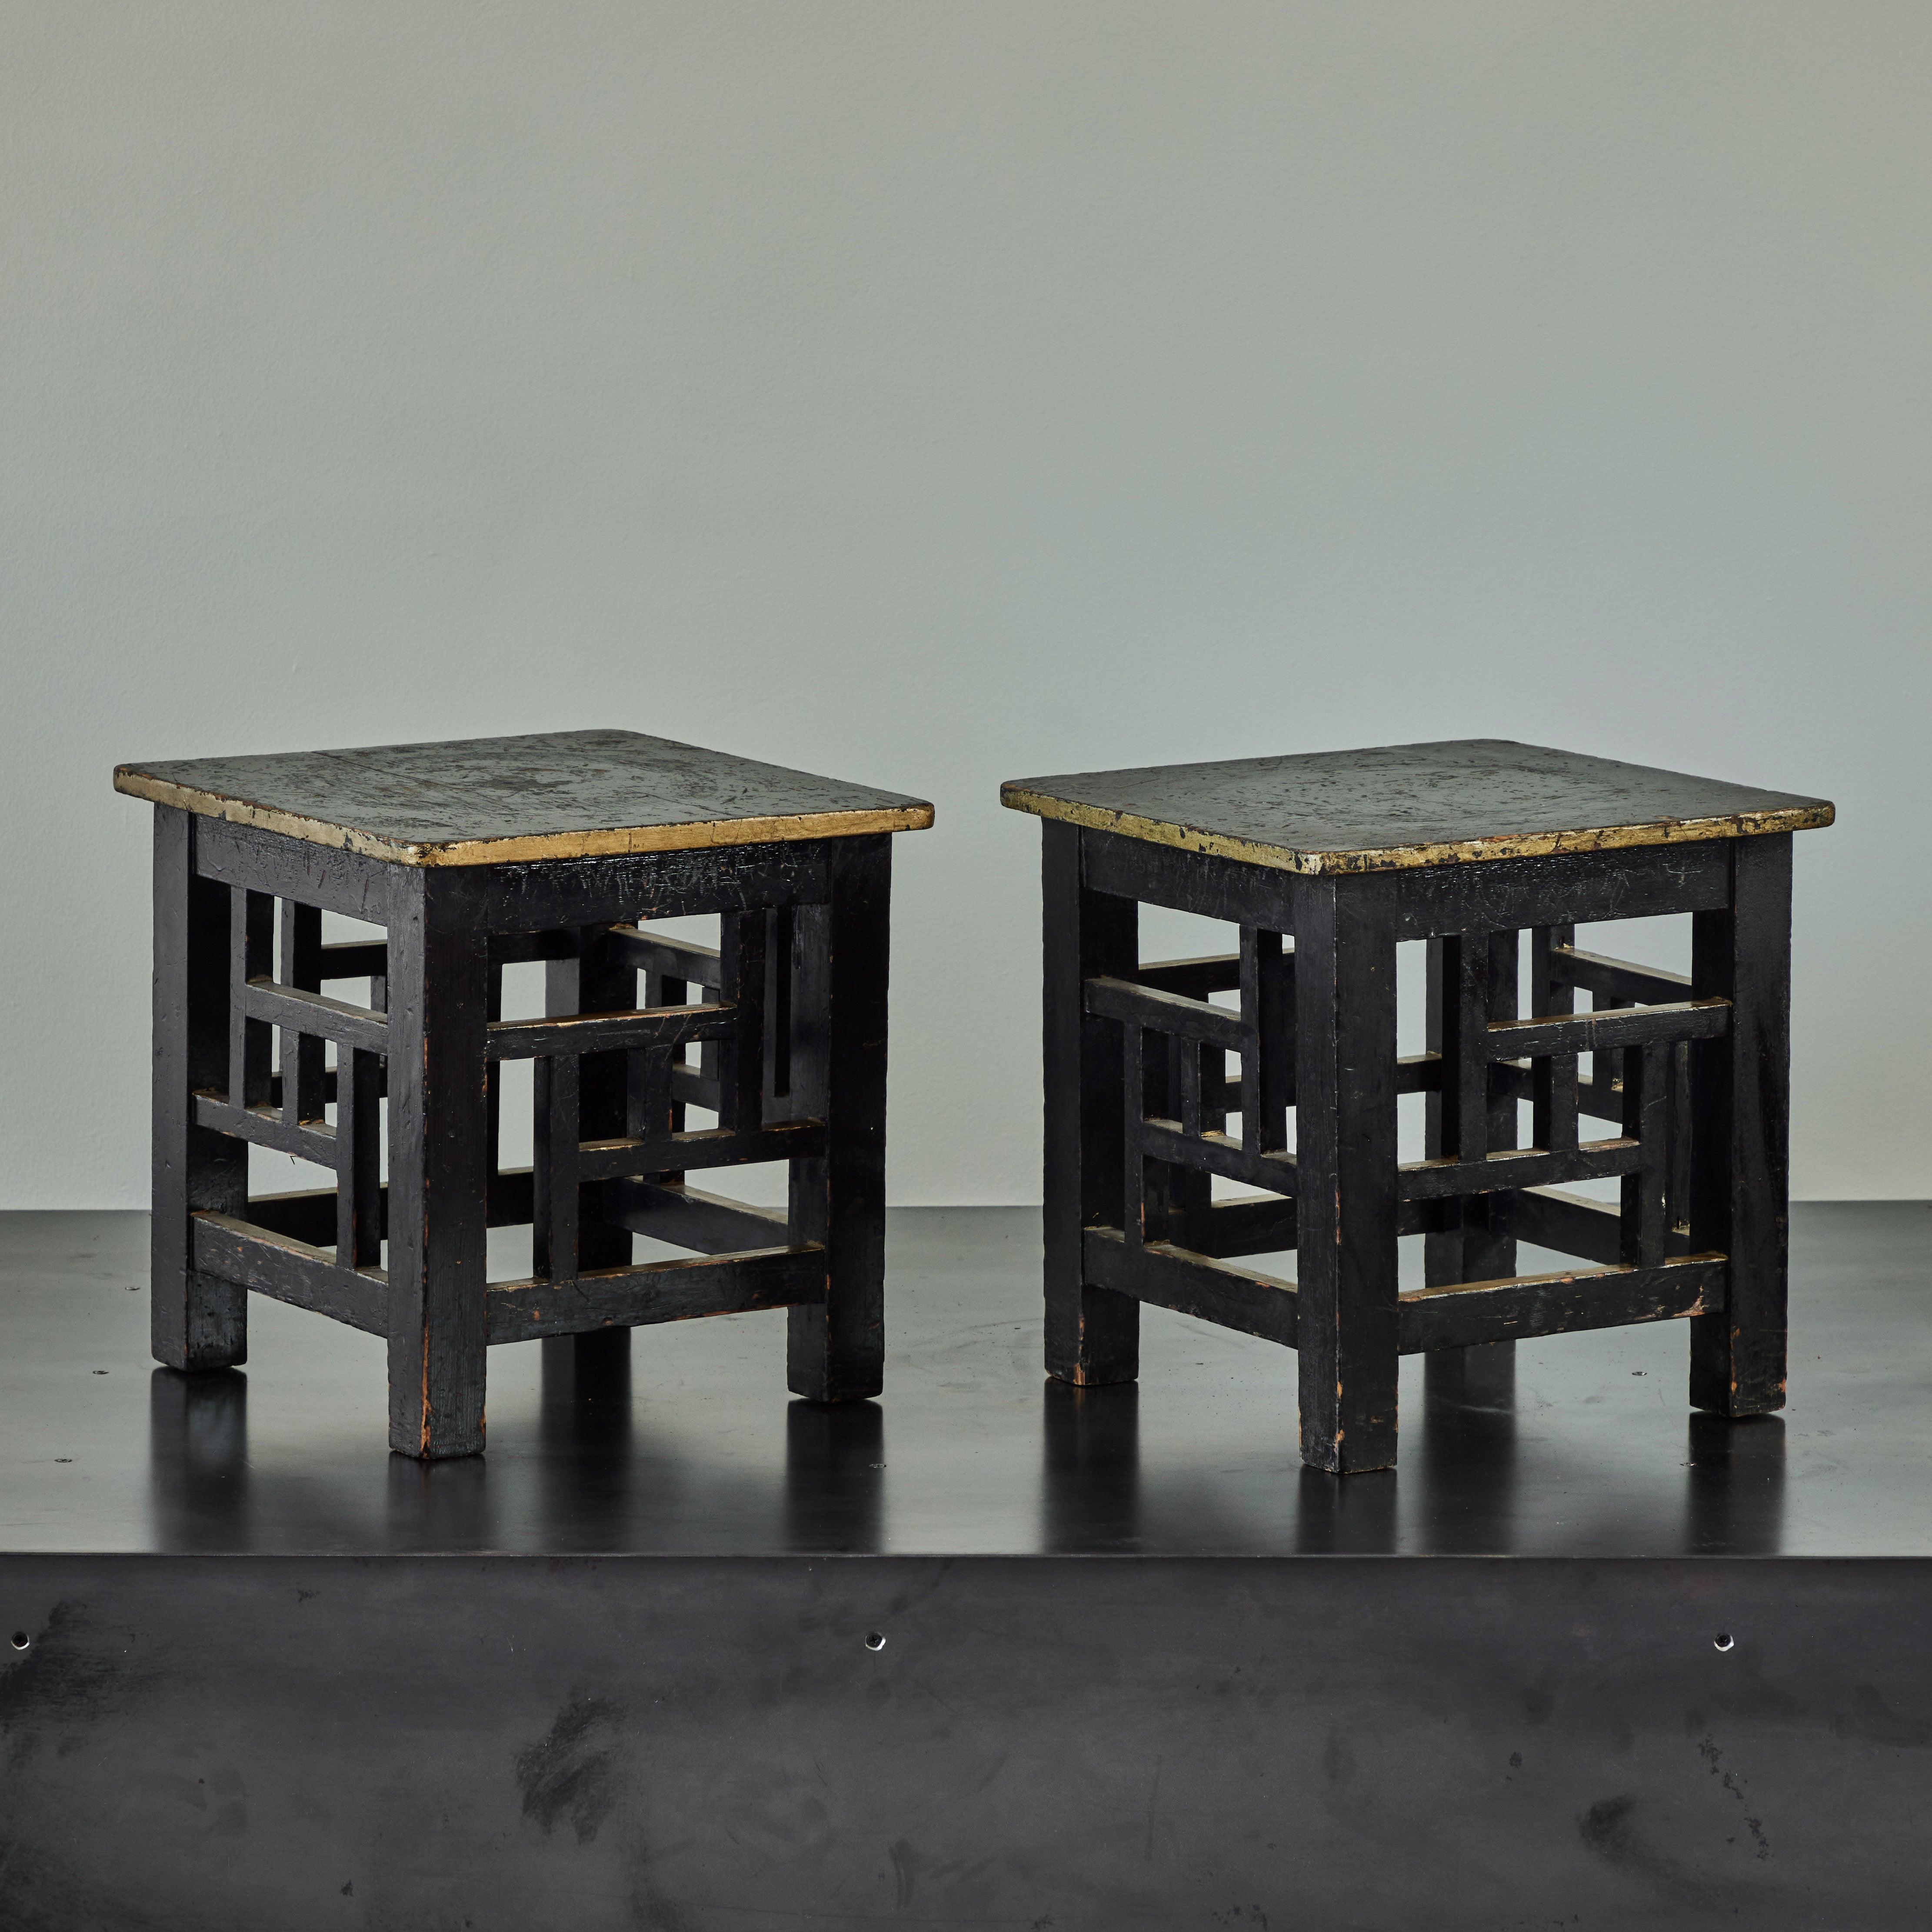 Pair of English late 19th-century occasional tables or stools in the Aesthetic Movement style. Featuring ebonized wood framework with traces of gilt decoration, the set has a beautiful patina. Spare, geometric, and with a strong commitment to